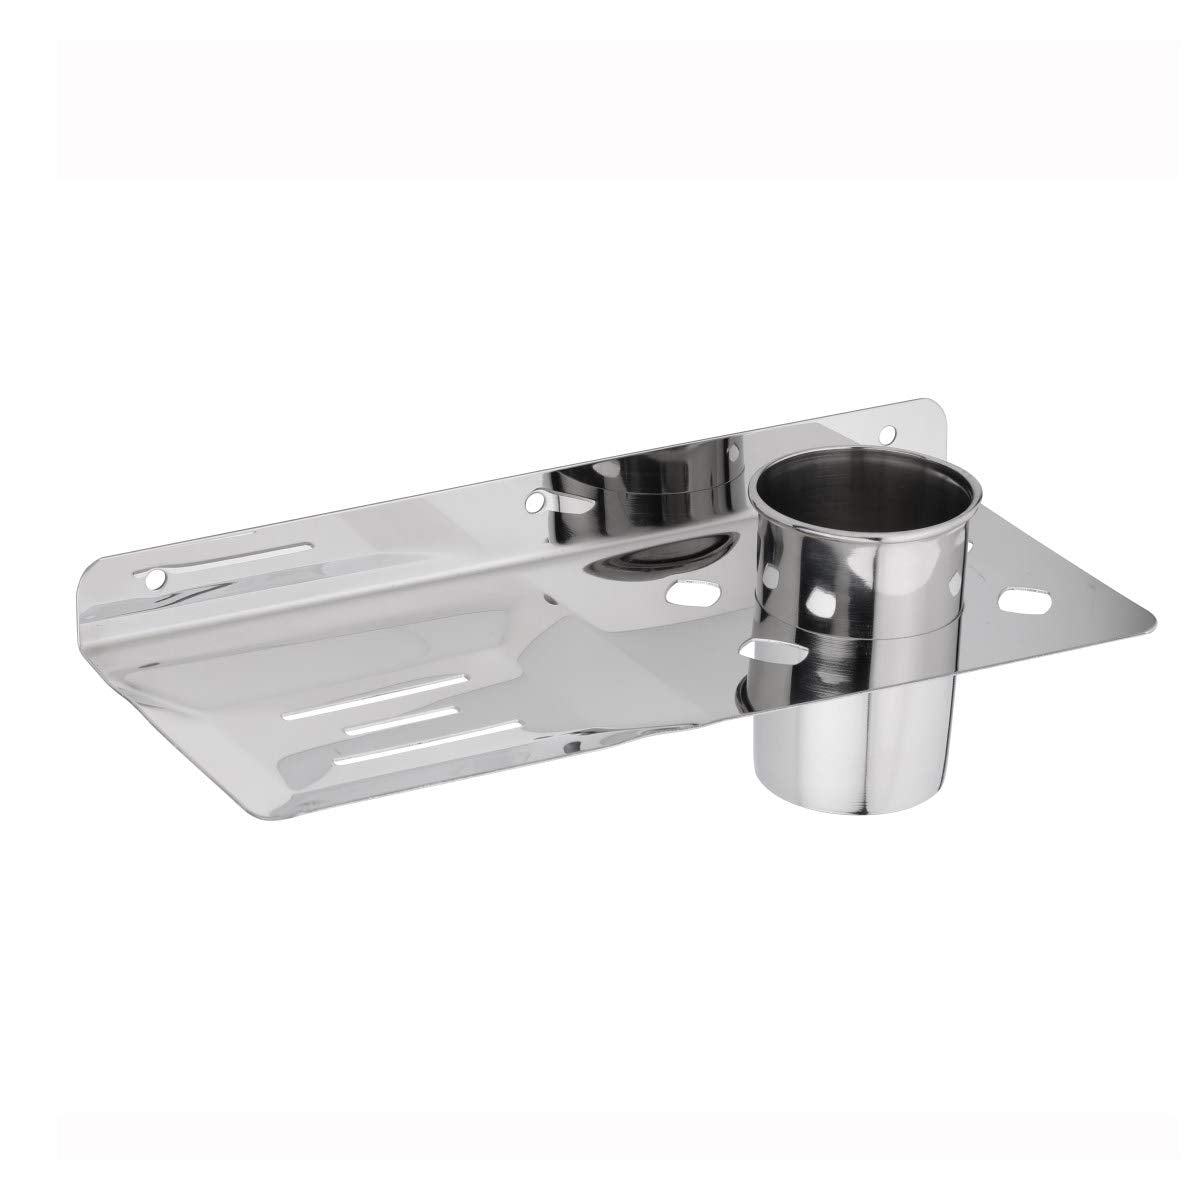 Plantex Platinum Stainless Steel Soap Dish with Tumbler Holder Bathroom Accessories - Pack of 3